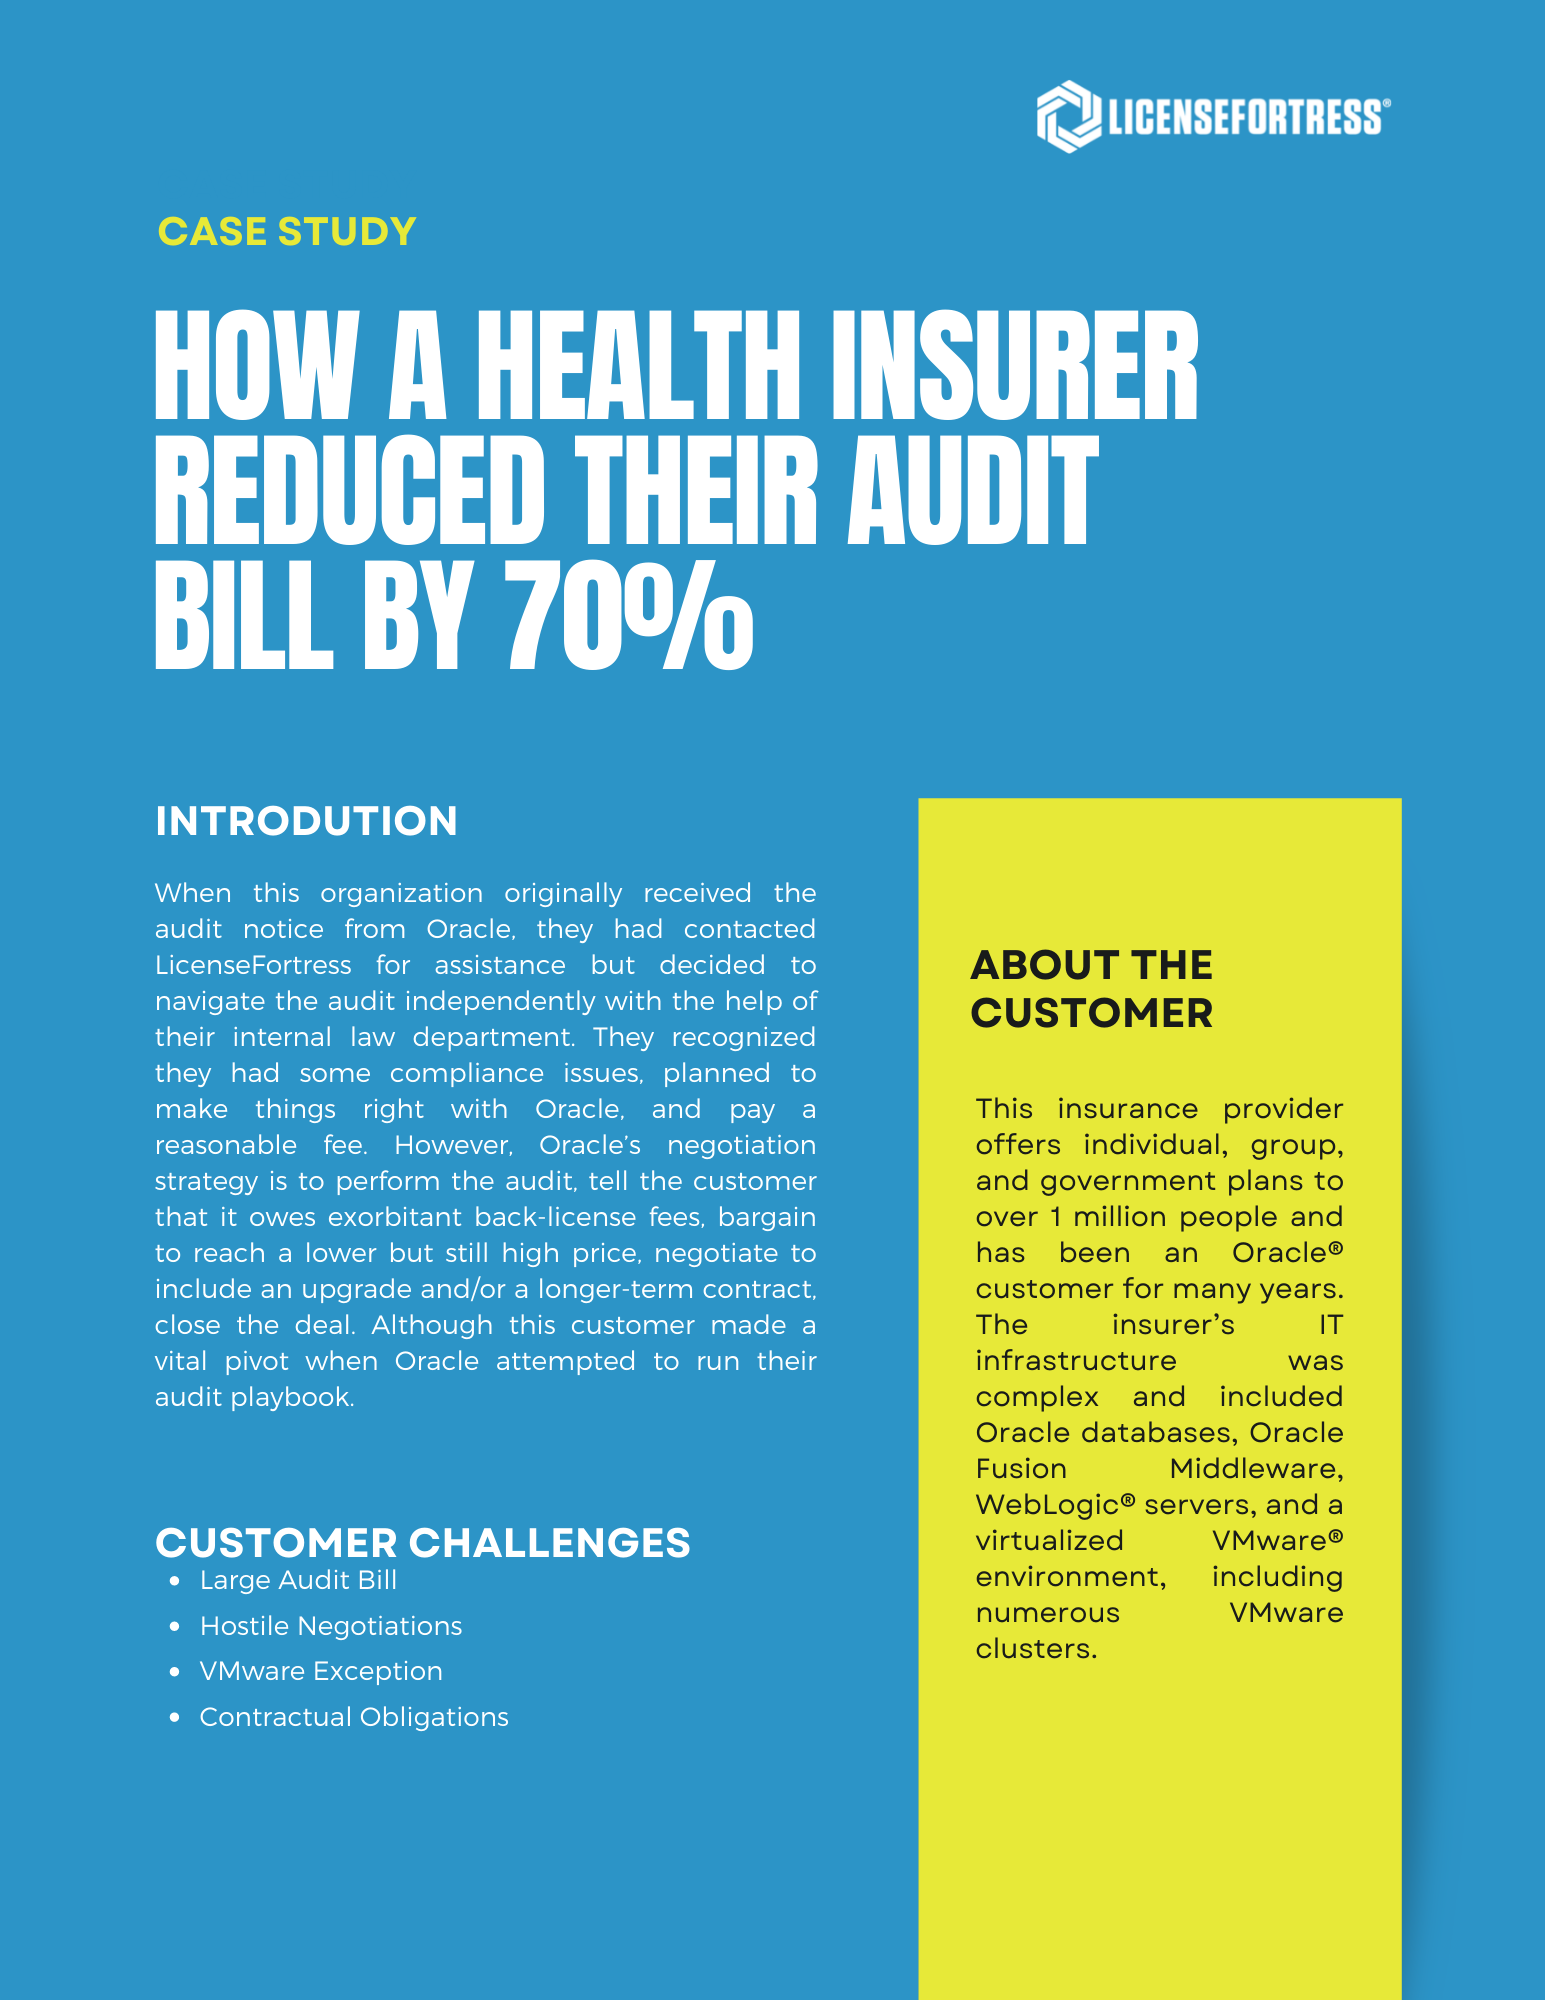 How a Health Insurer Reduced Their Audit Bill by 70%